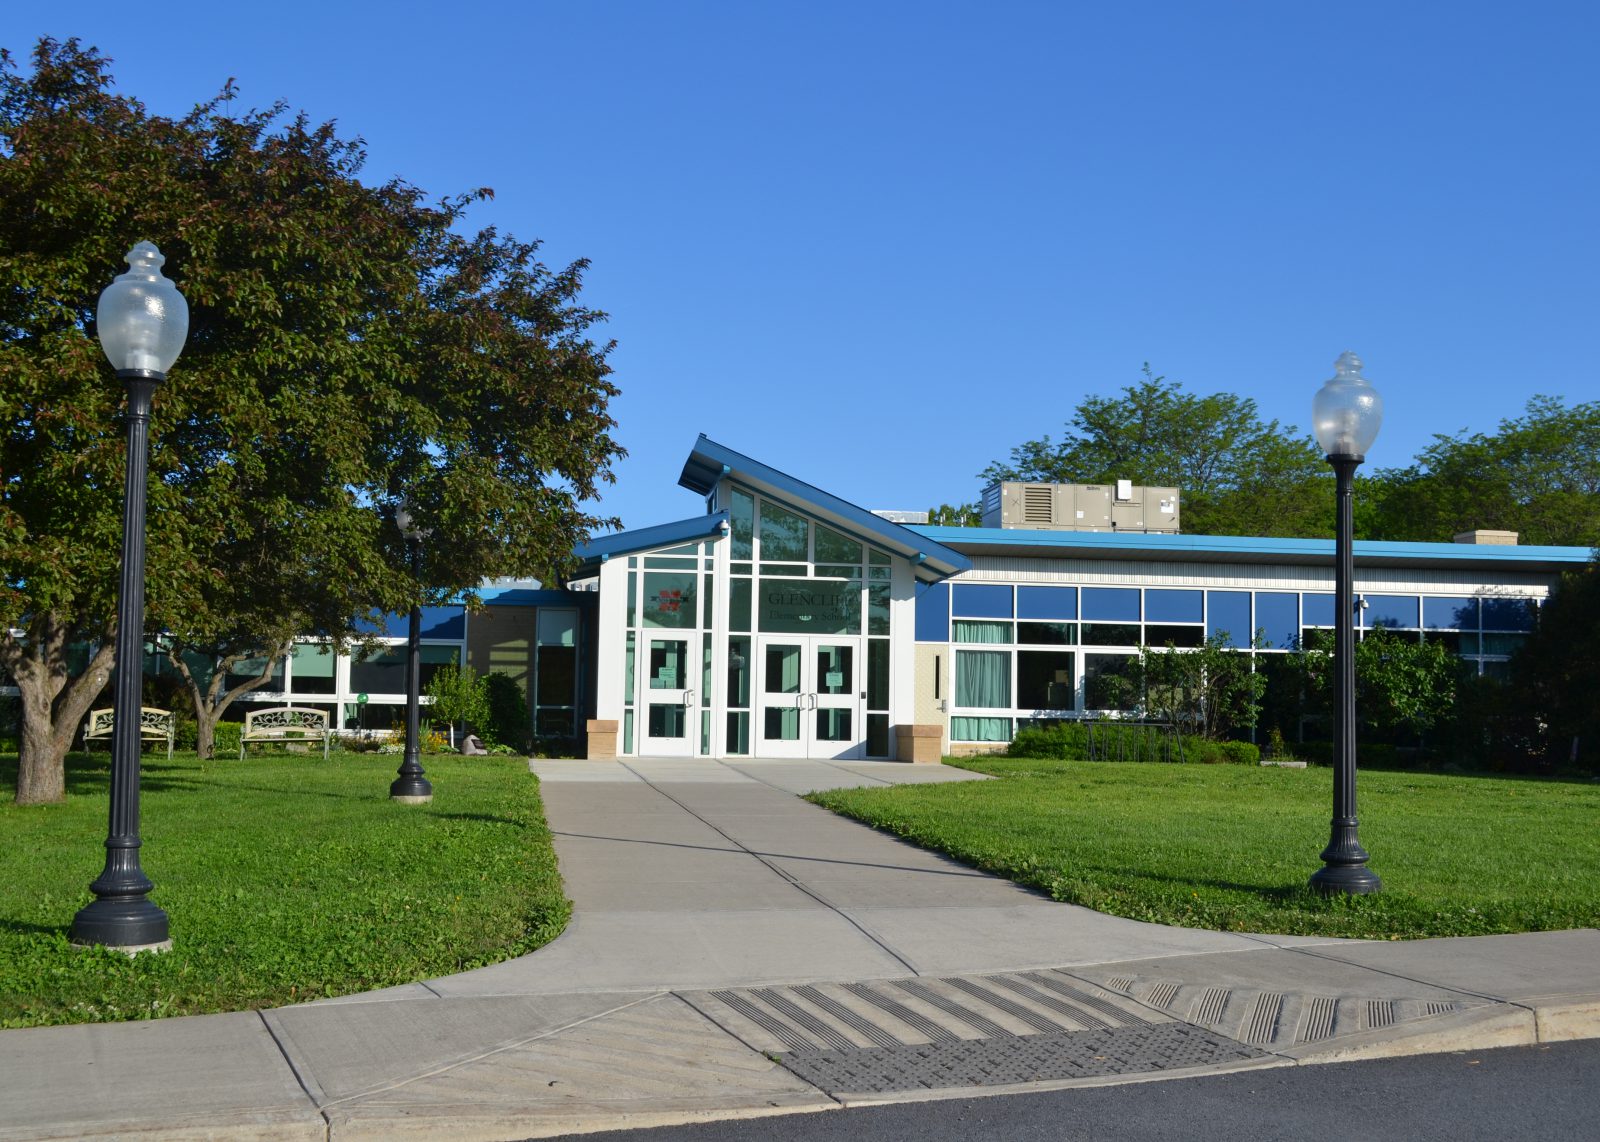 The front of Glencliff Elementary School